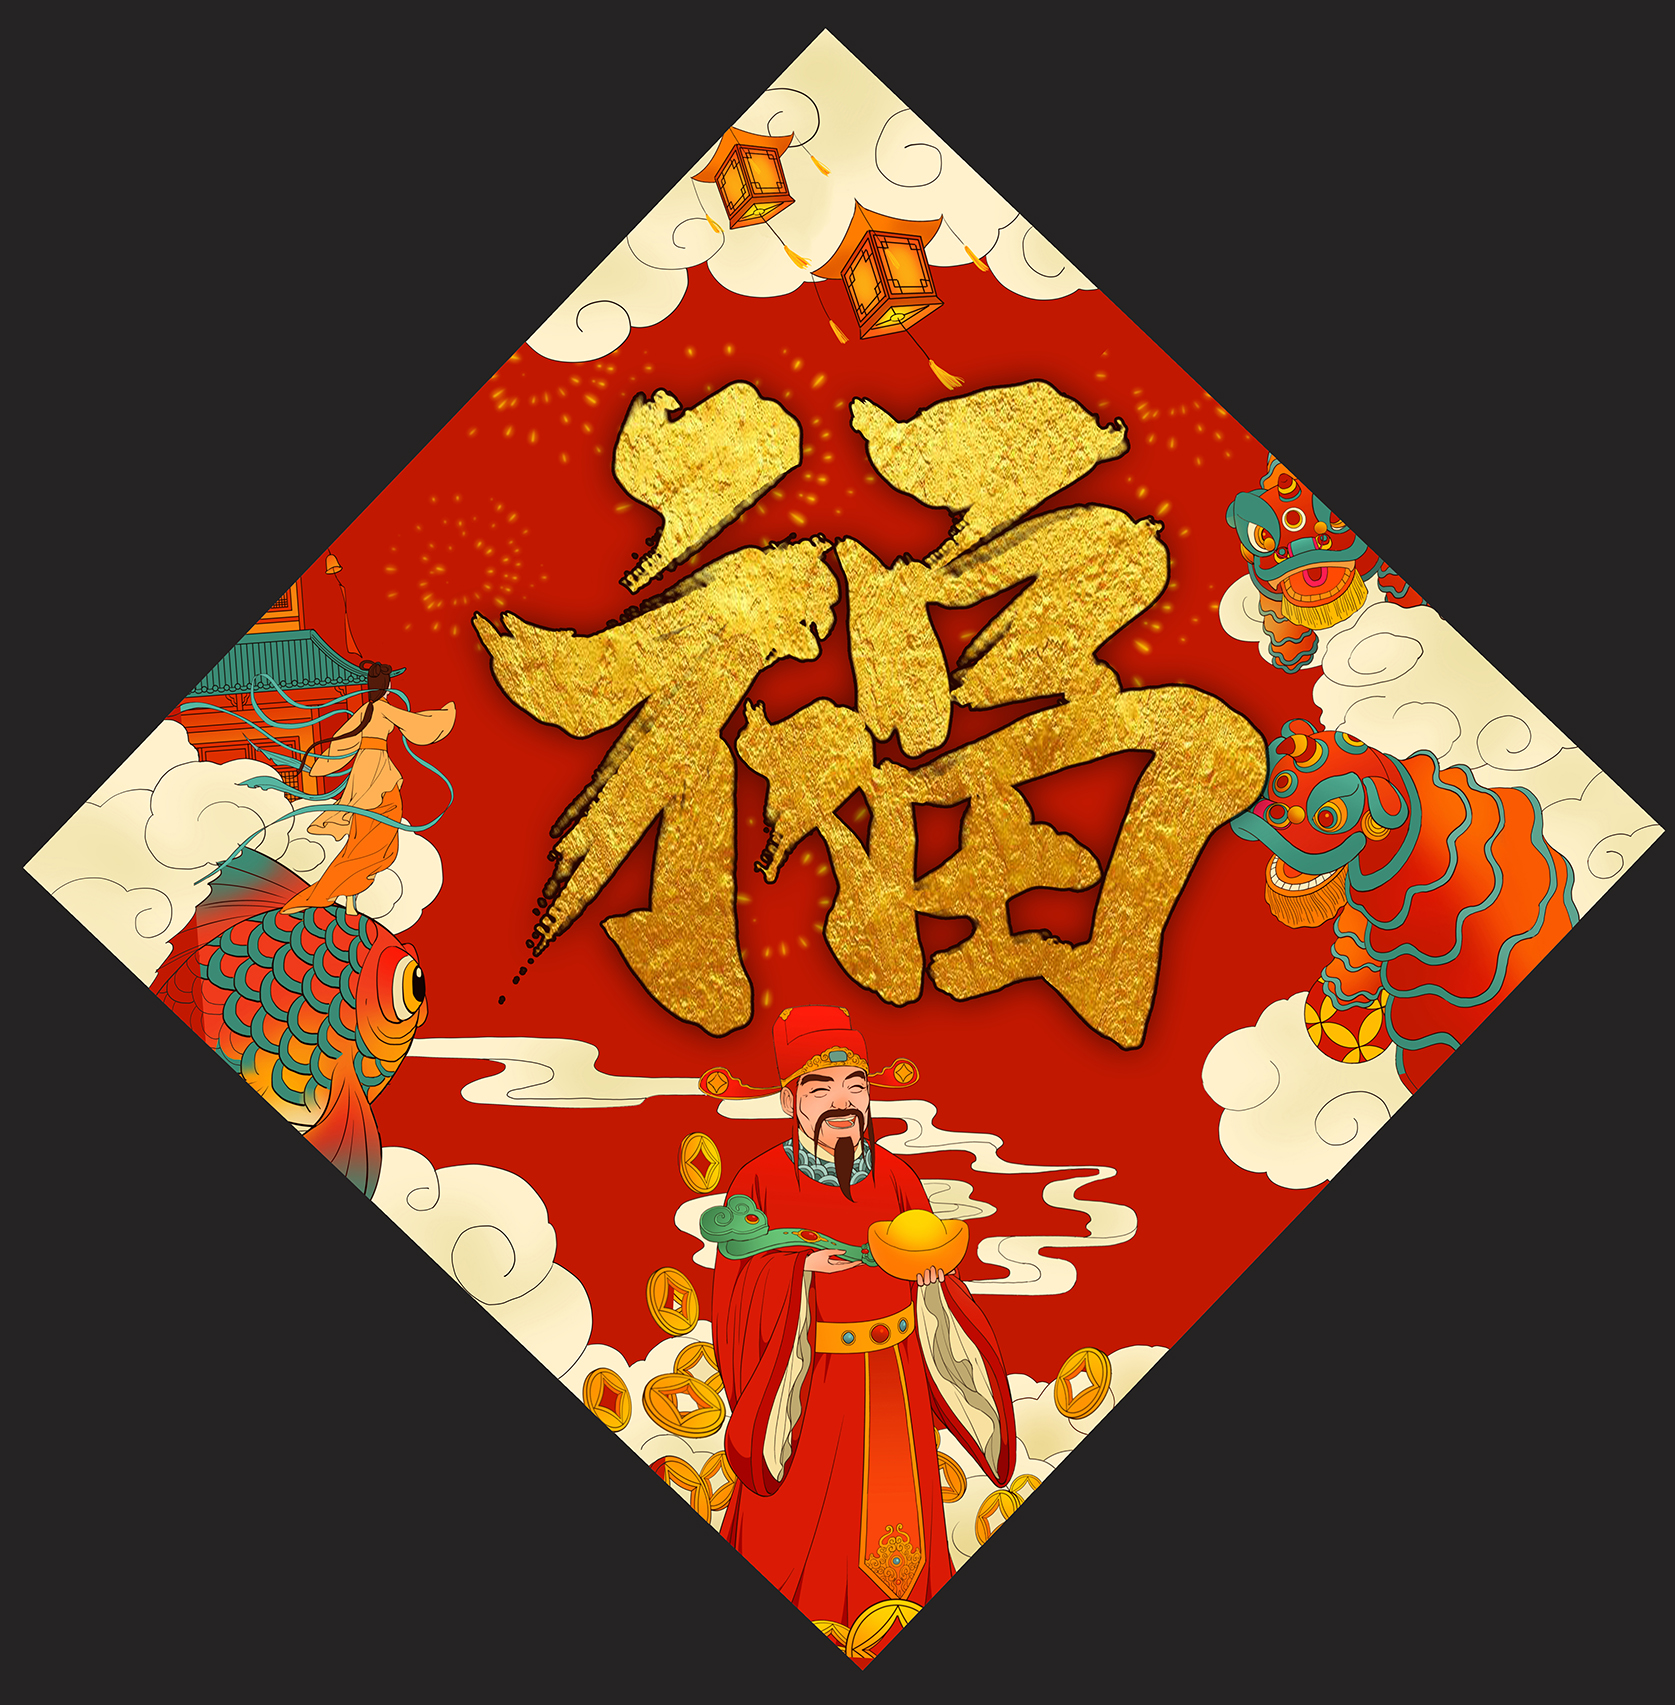 Design of Spring Festival couplets in 2021 Year of the Ox